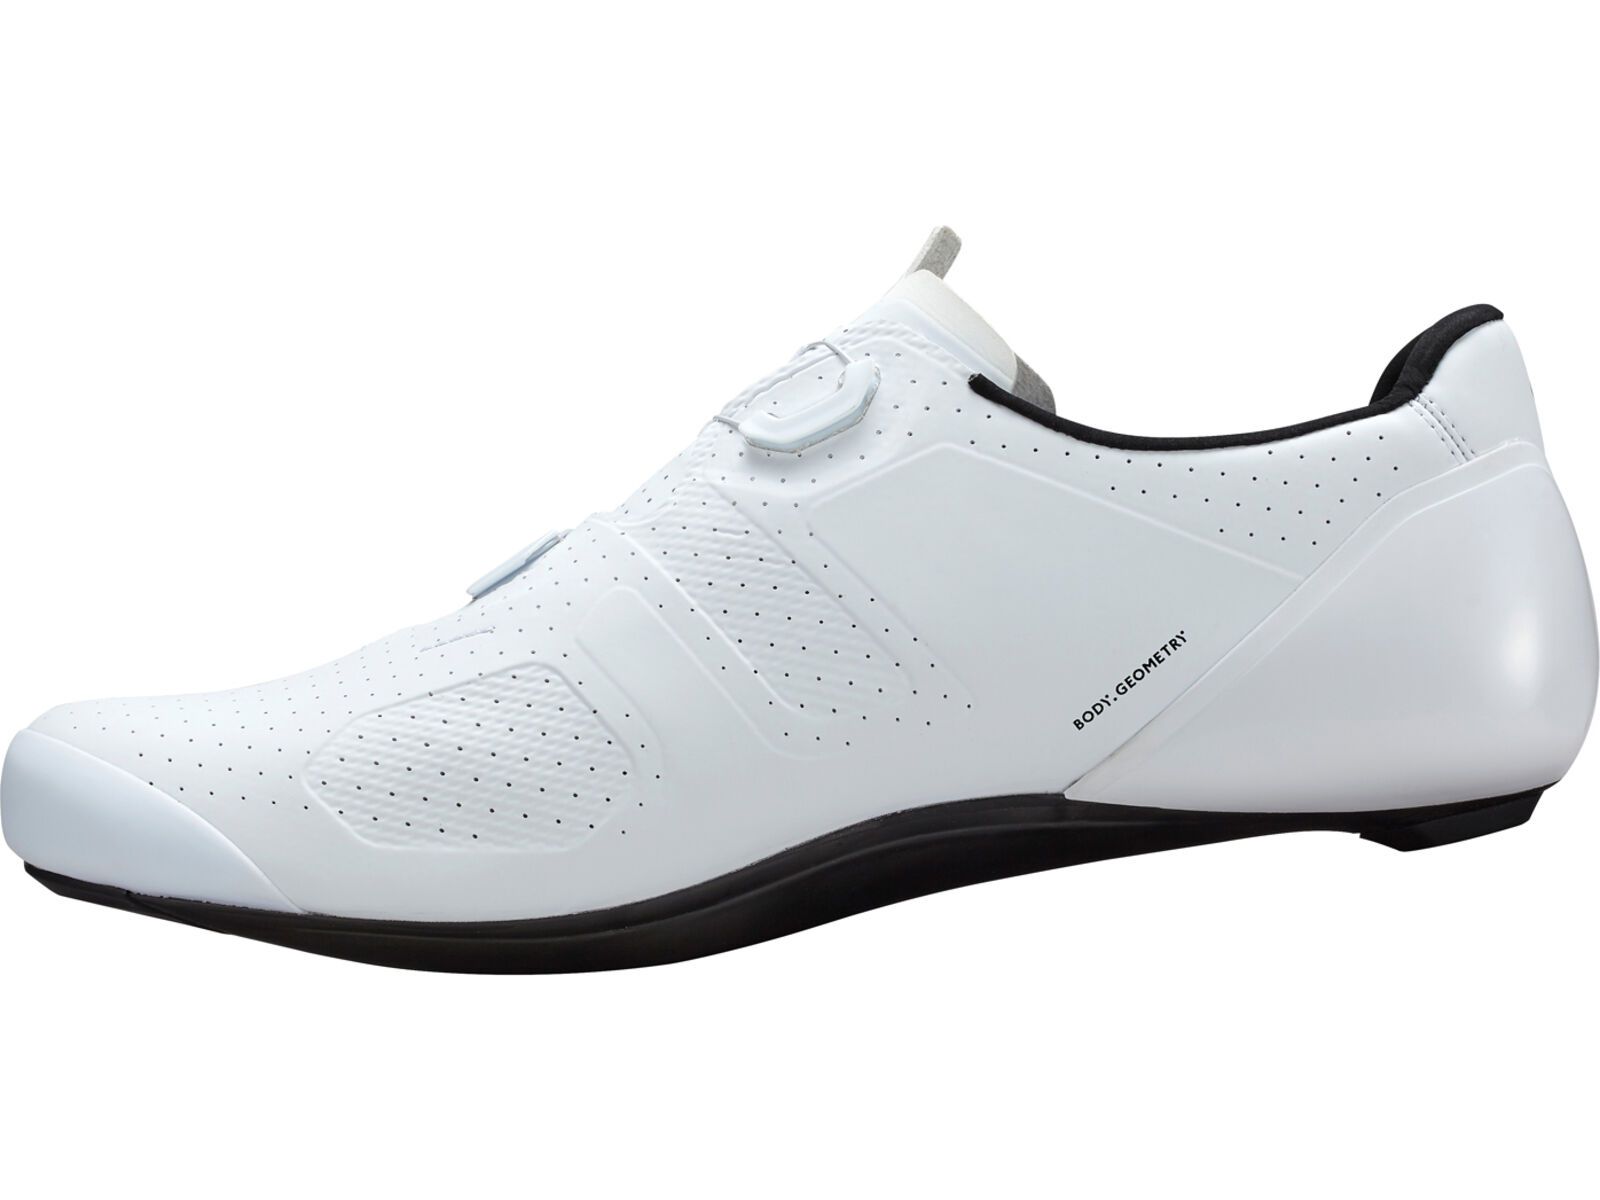 ***2. Wahl*** Specialized S-Works Torch Road white | Bild 3